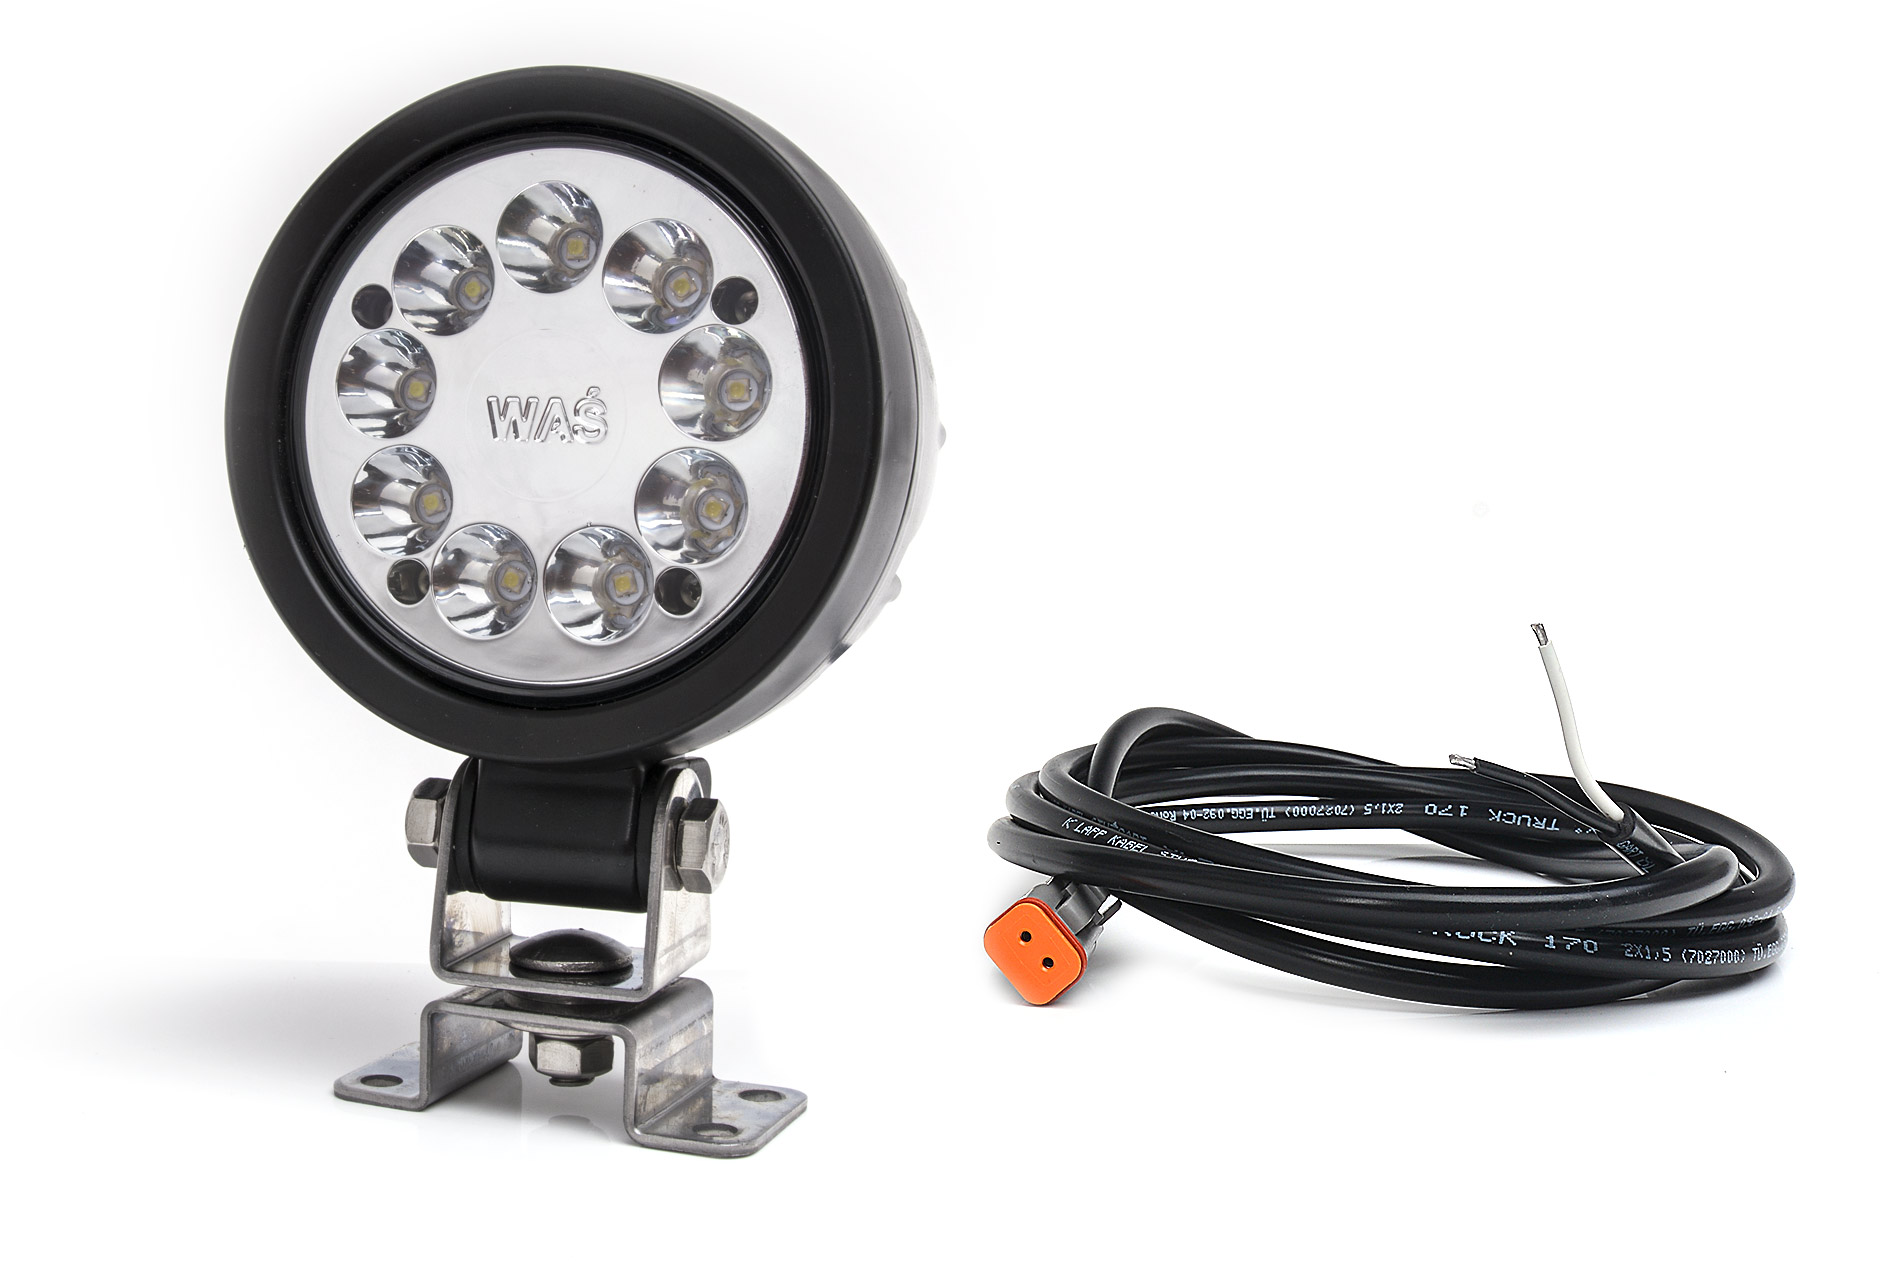 Work lamps - W162 5000